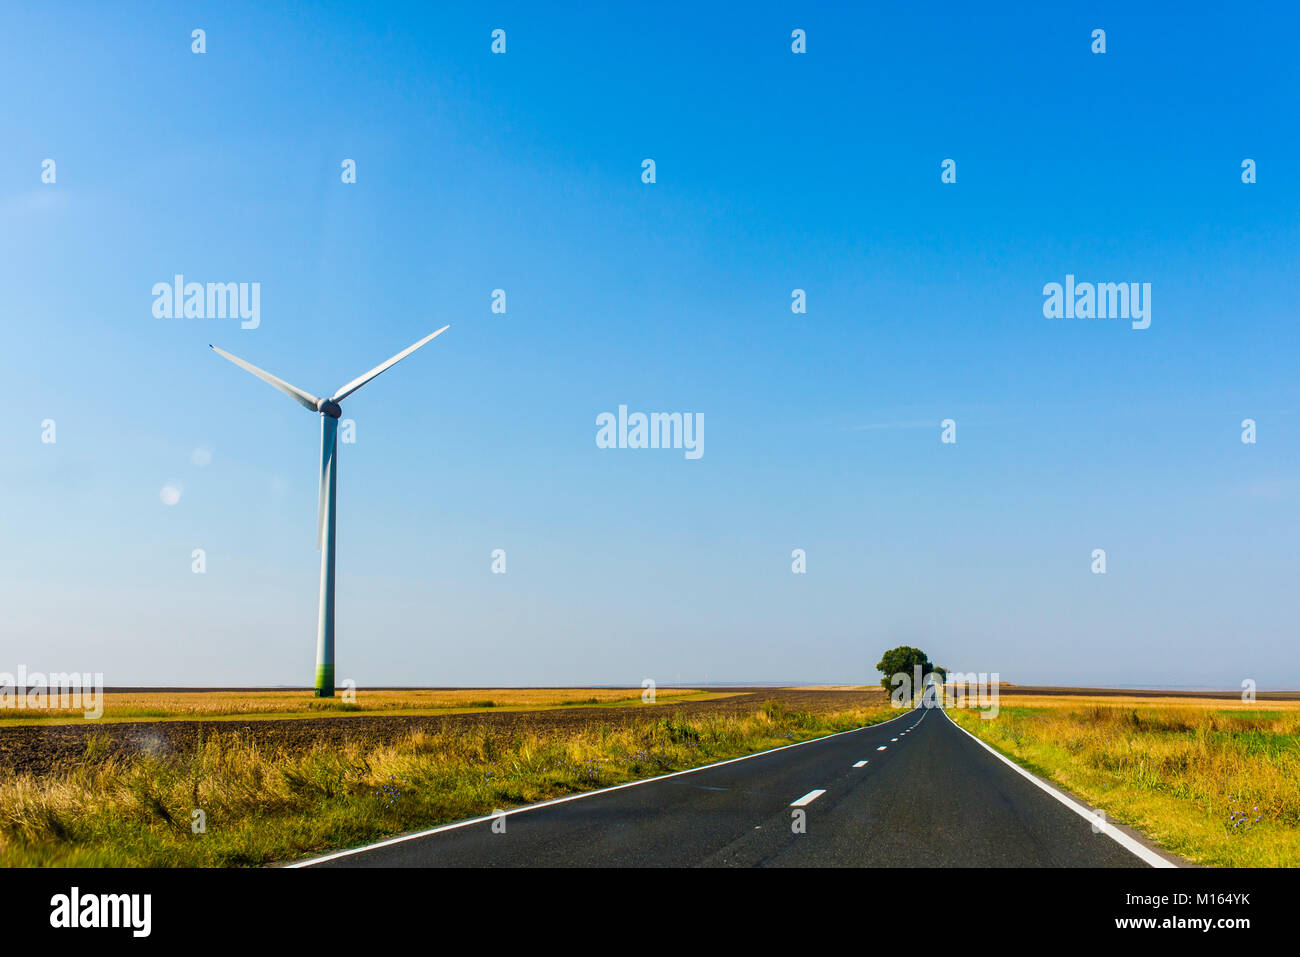 Windmills beside the road for renewable energy production from alternative energy sources like wind power Stock Photo